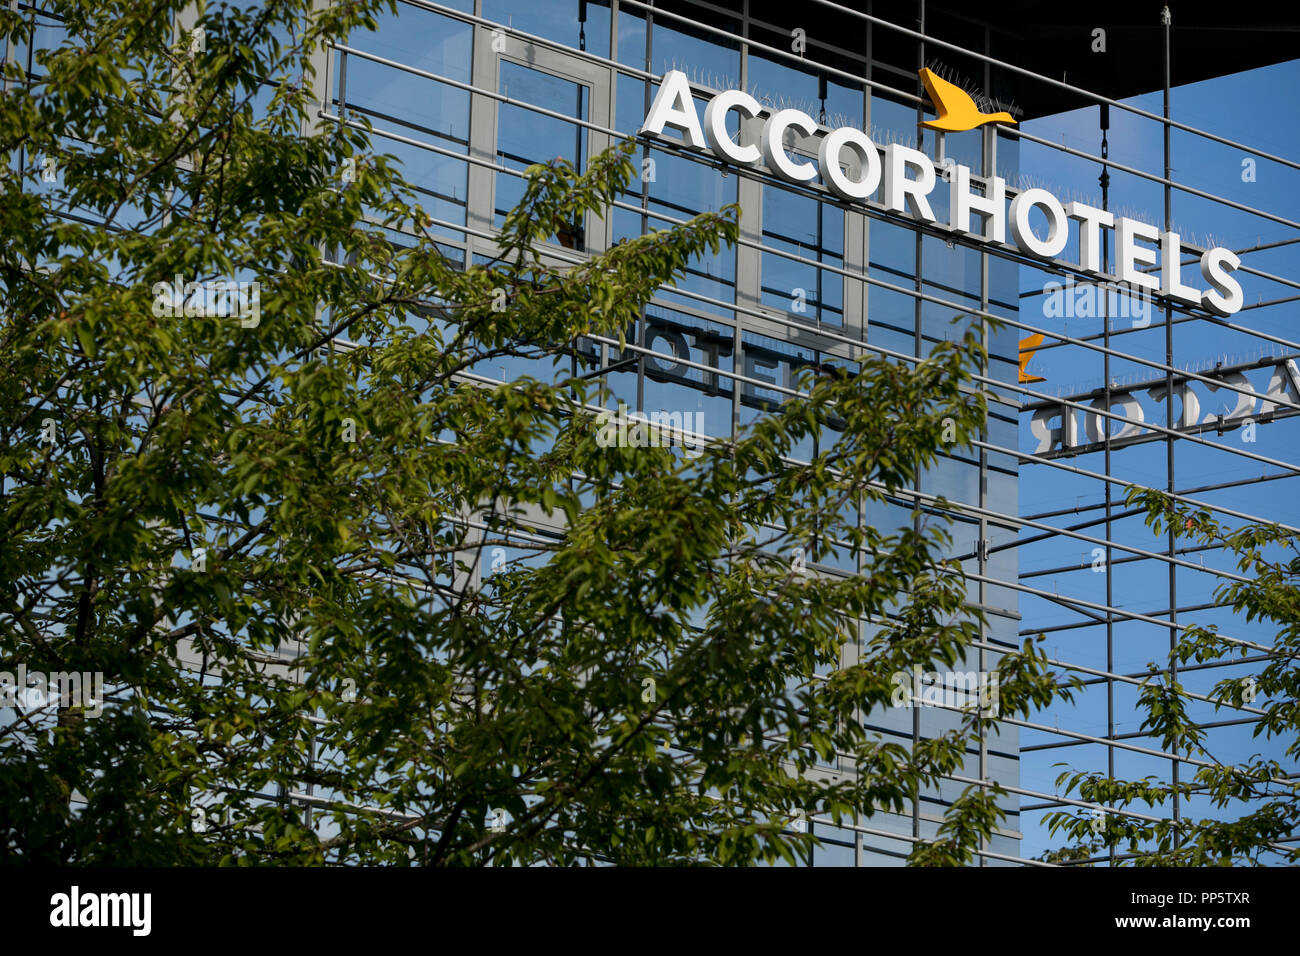 Accor Hotels High Resolution Stock Photography and Images - Alamy